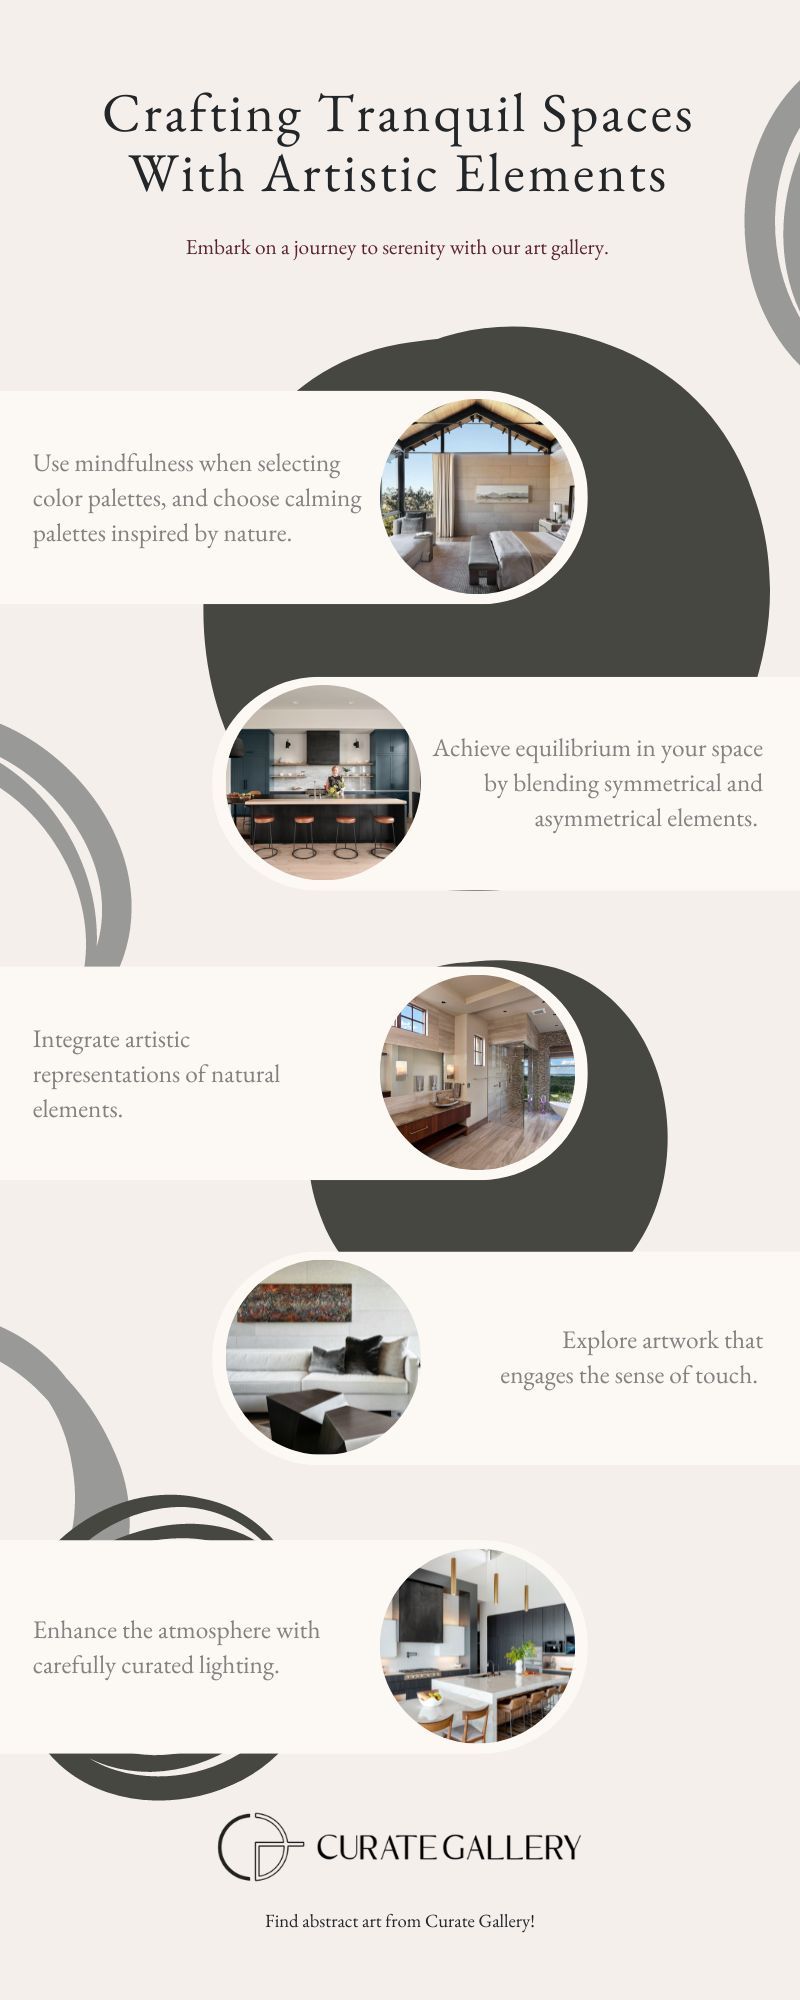 M38898 - Infographic - Crafting Tranquil Spaces With Artistic Elements.jpg